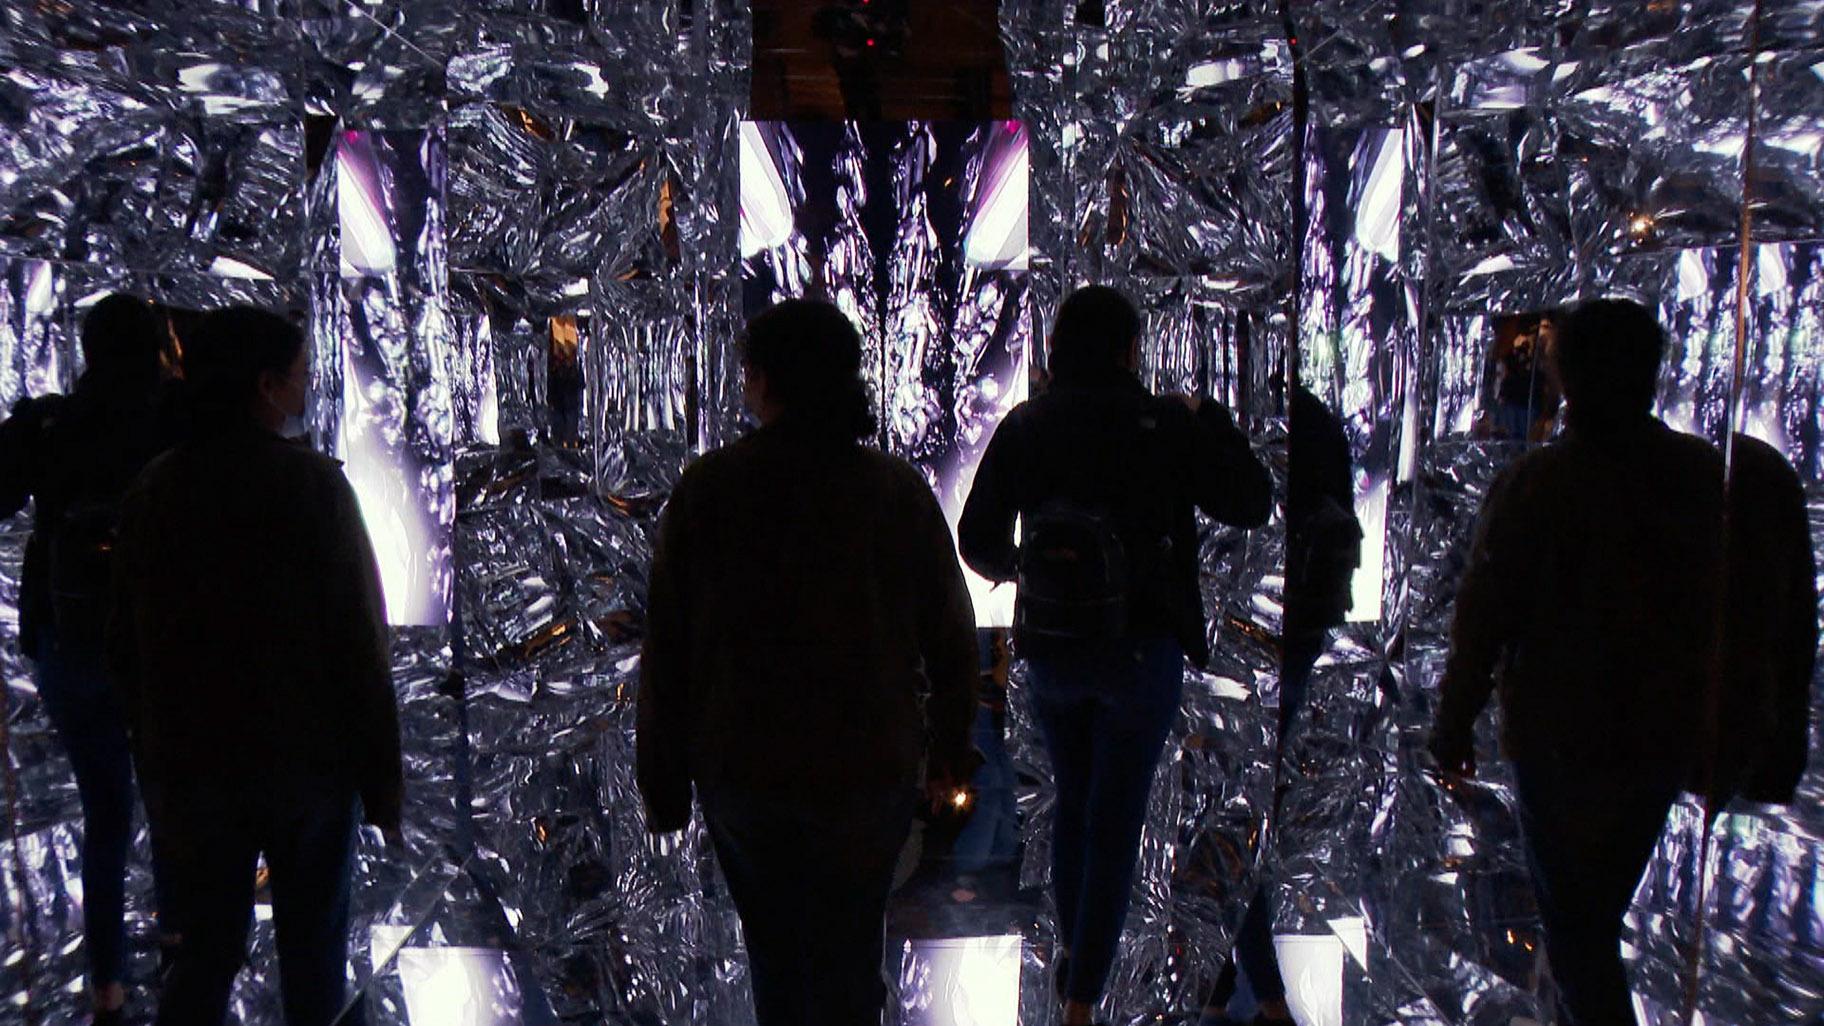 Because this room of mirrors allows this NFT to fully encompass a physical space, that makes “Quantum Mirror” the very first NFT sculpture. (WTTW News)